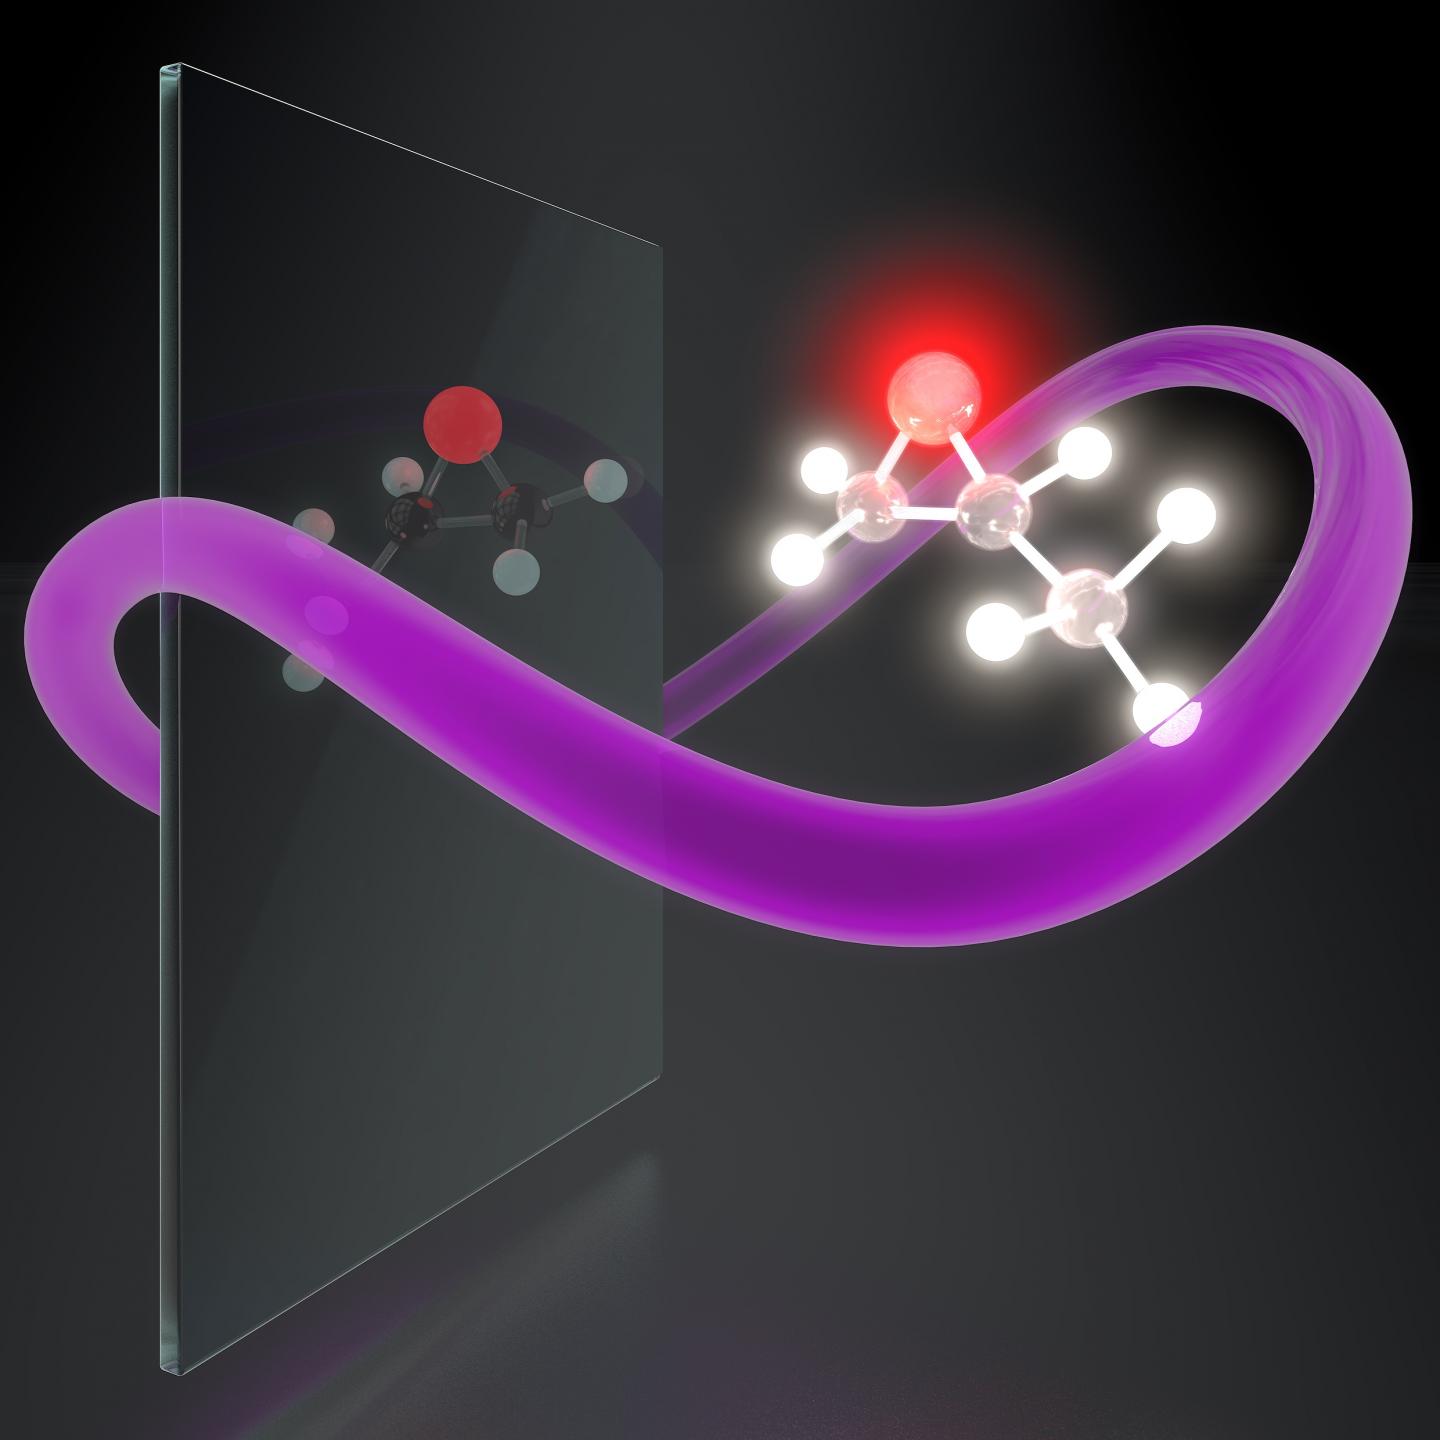 Synthetic chiral light selectively interacts with one of the two versions of a chiral molecule (left or right). The selected version responds by emitting very bright light, while its “mirror twin” remains dark. Courtesy of Steven Roberts, MBI.